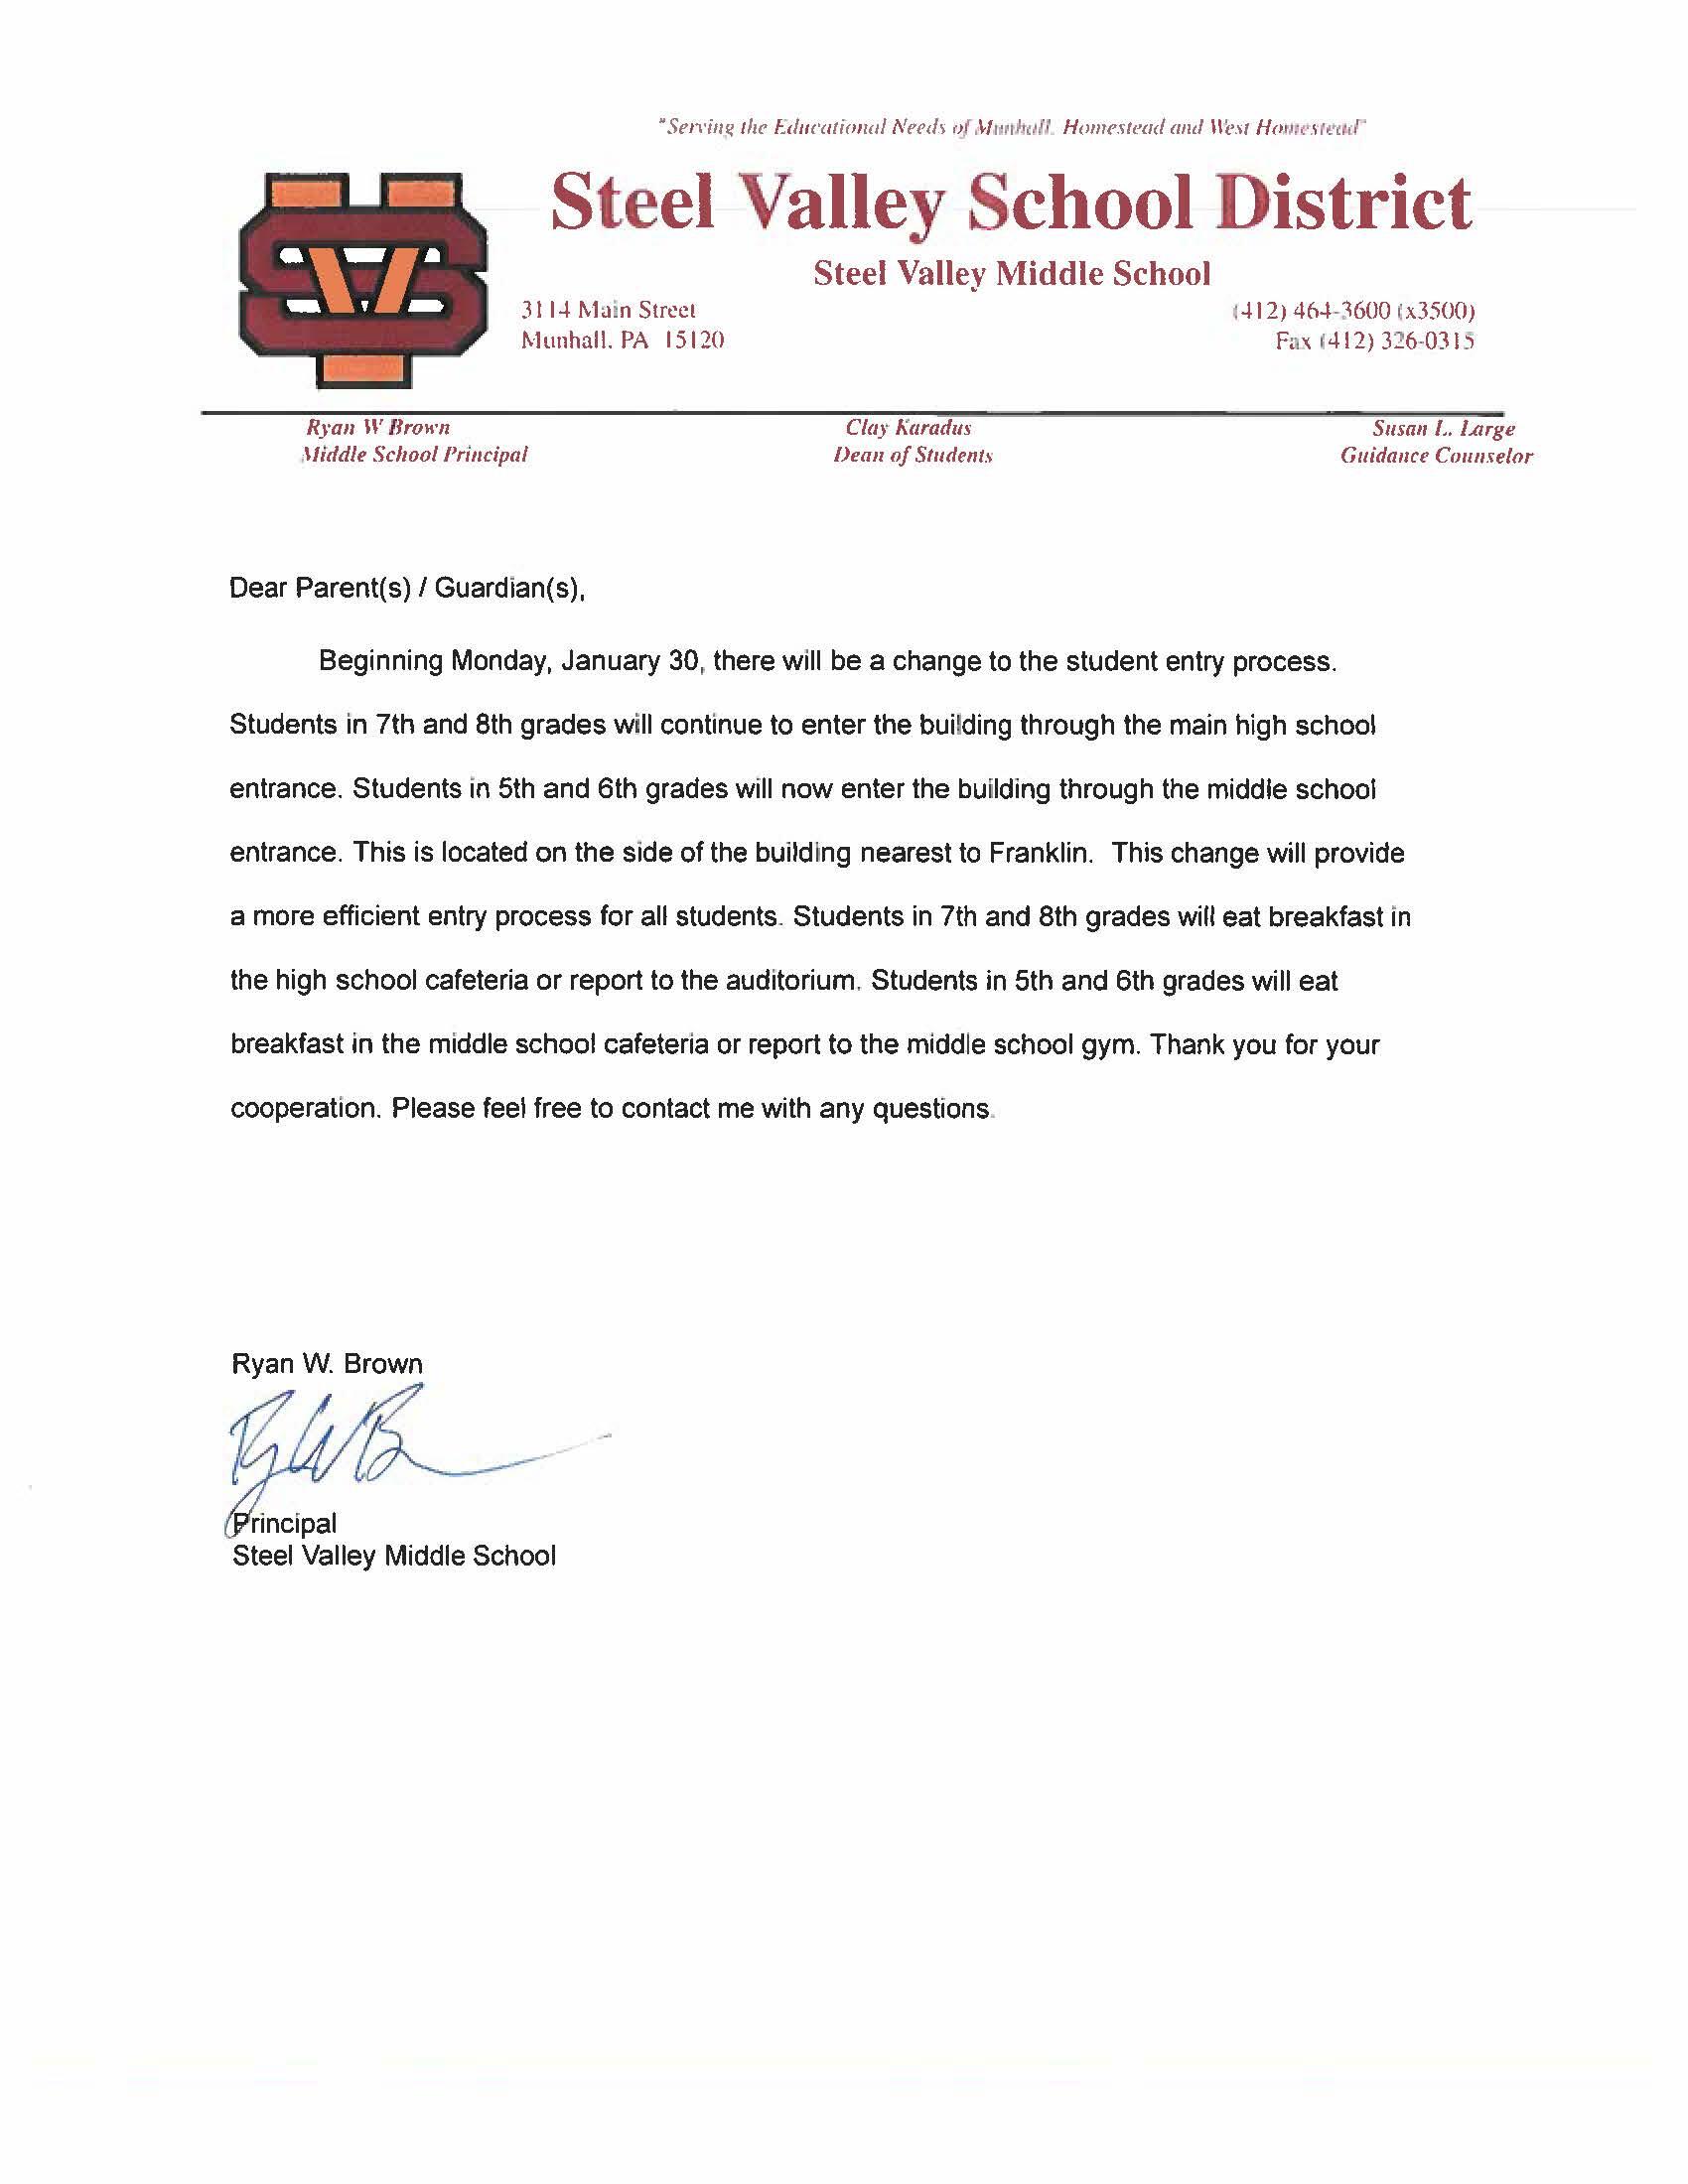 An image of the letter announcing changes to middle school entry procedures.